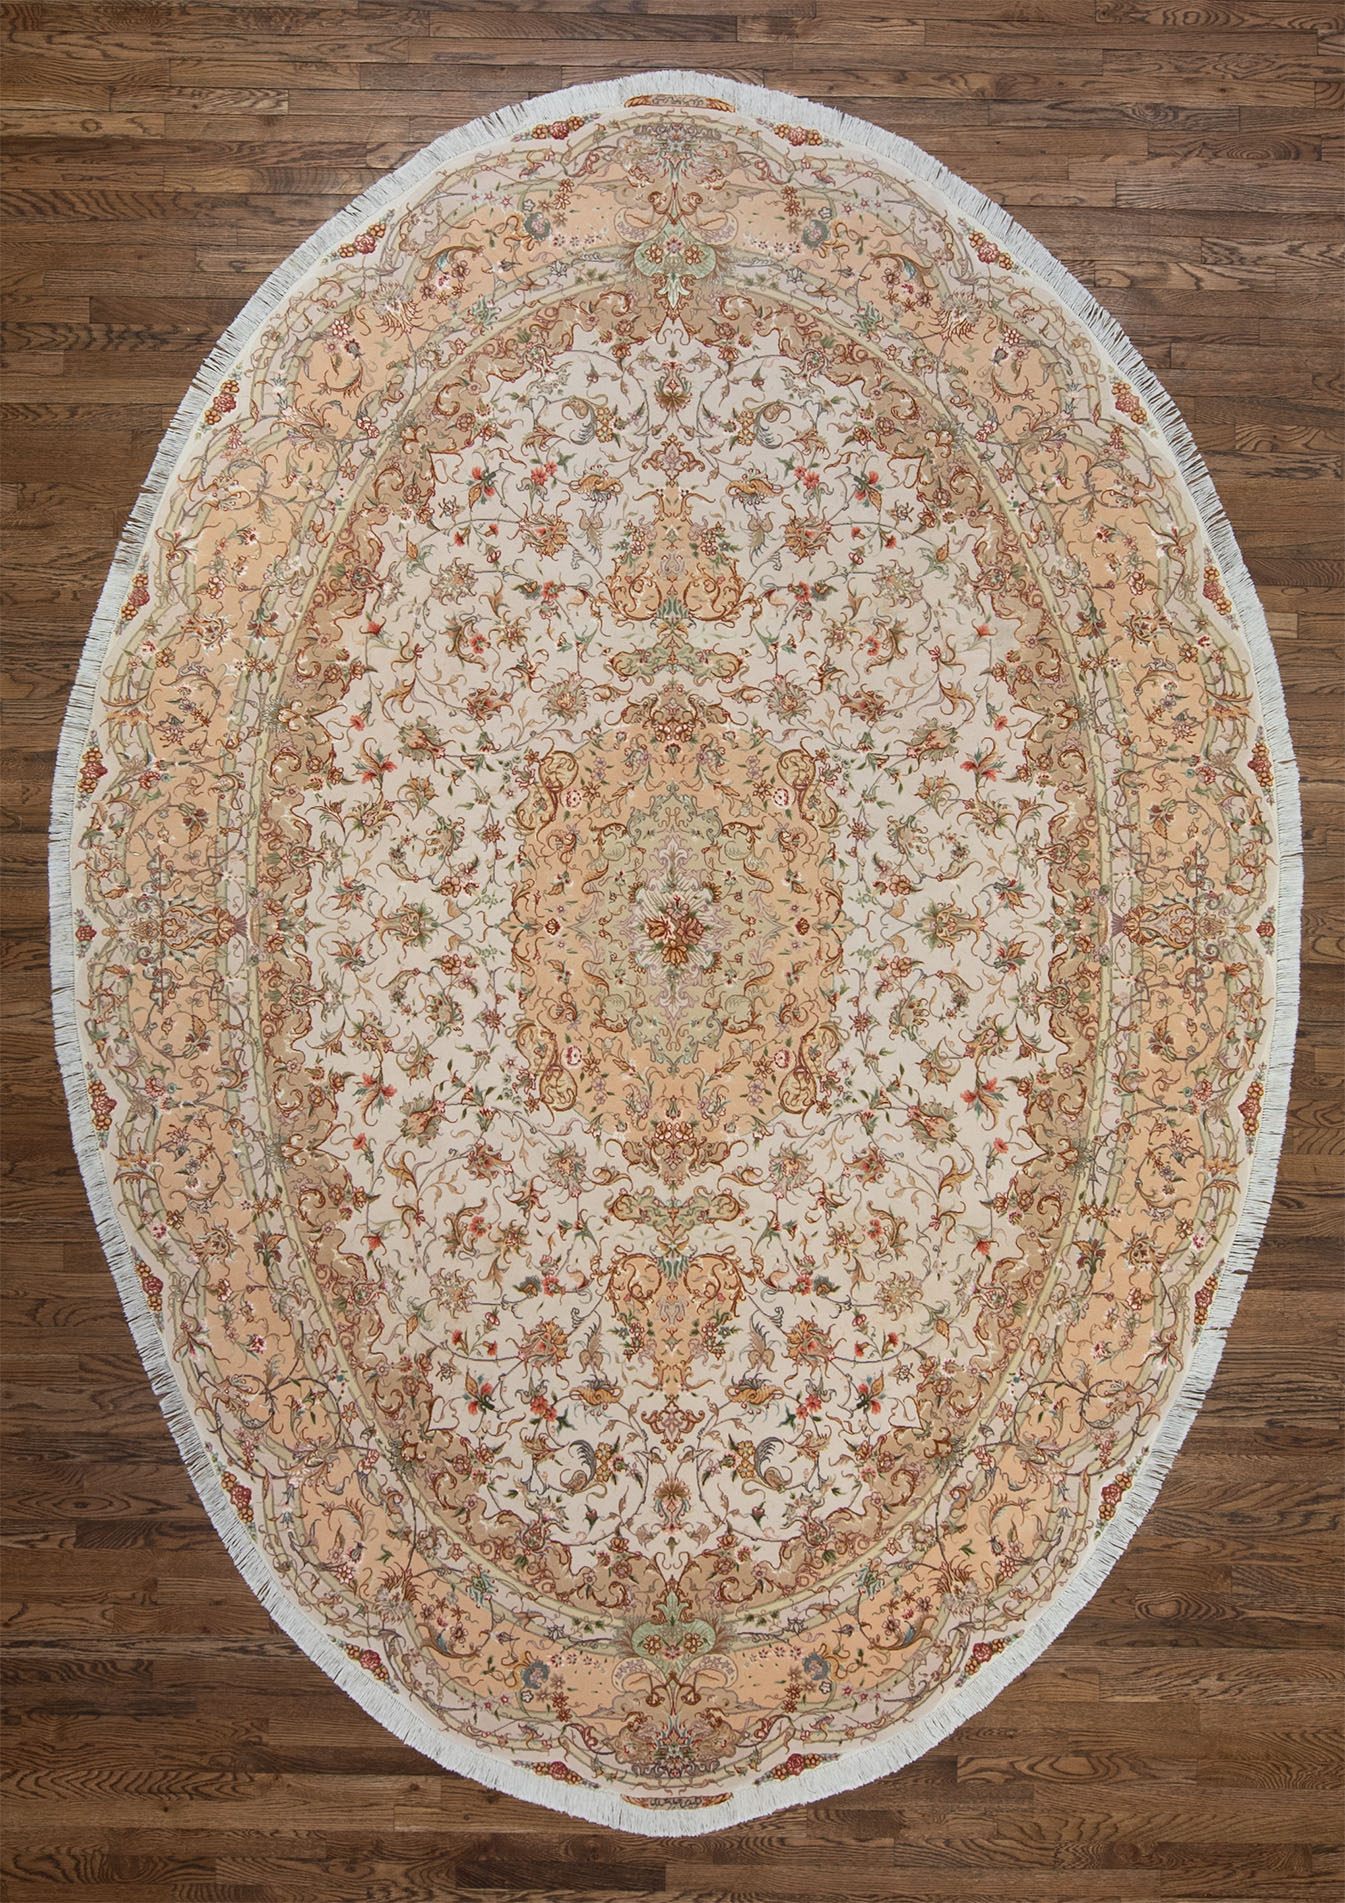 Oval Persian rug, Handmade wool and silk Persian Tabriz oval rug in beige and salmon colors. Size 8.5x11.10.